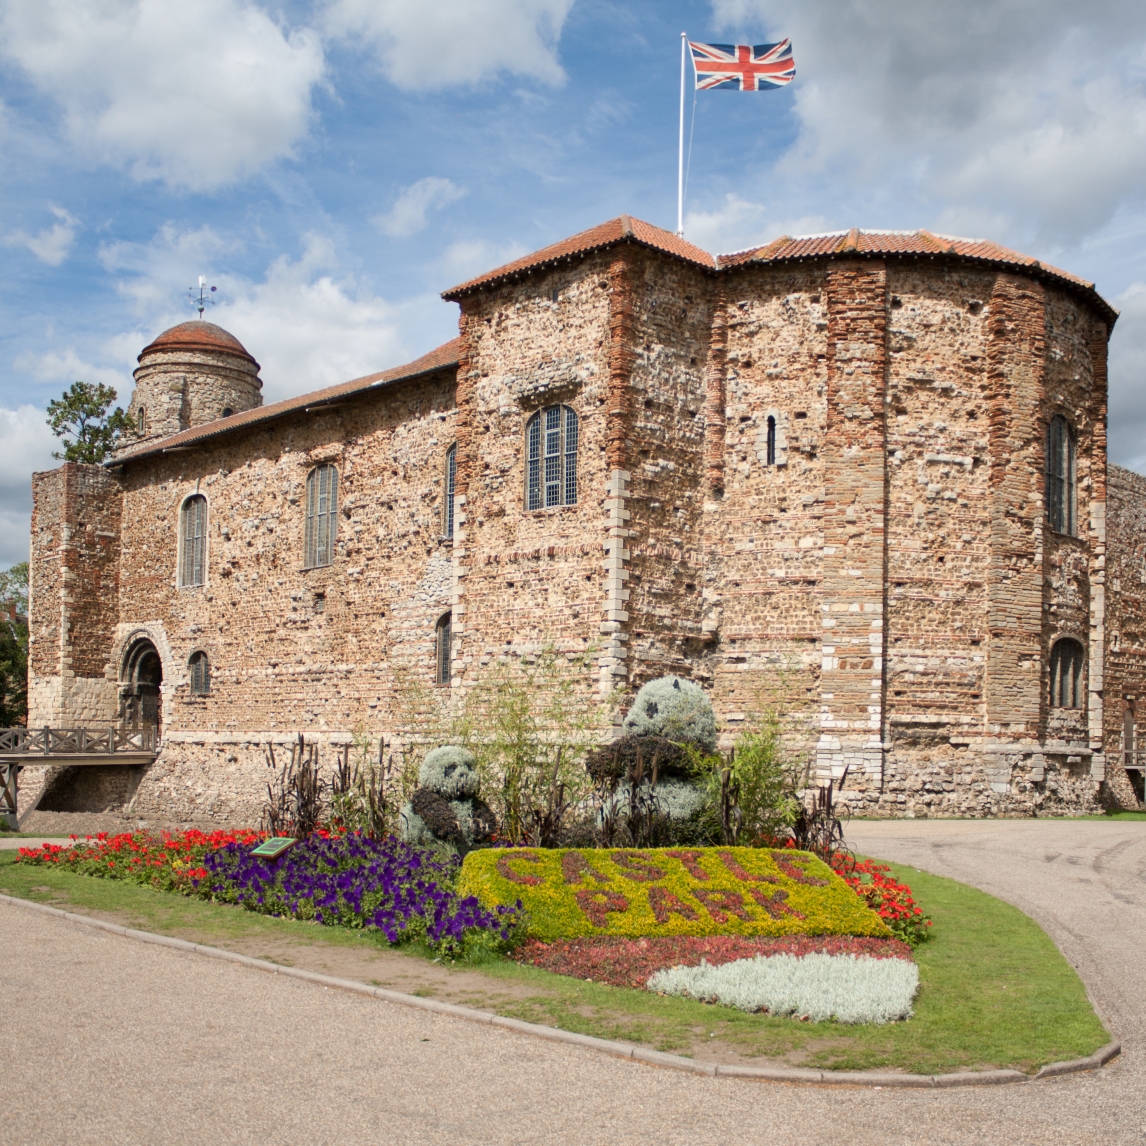 Visit Colchester Castle Park for an afternoon stroll